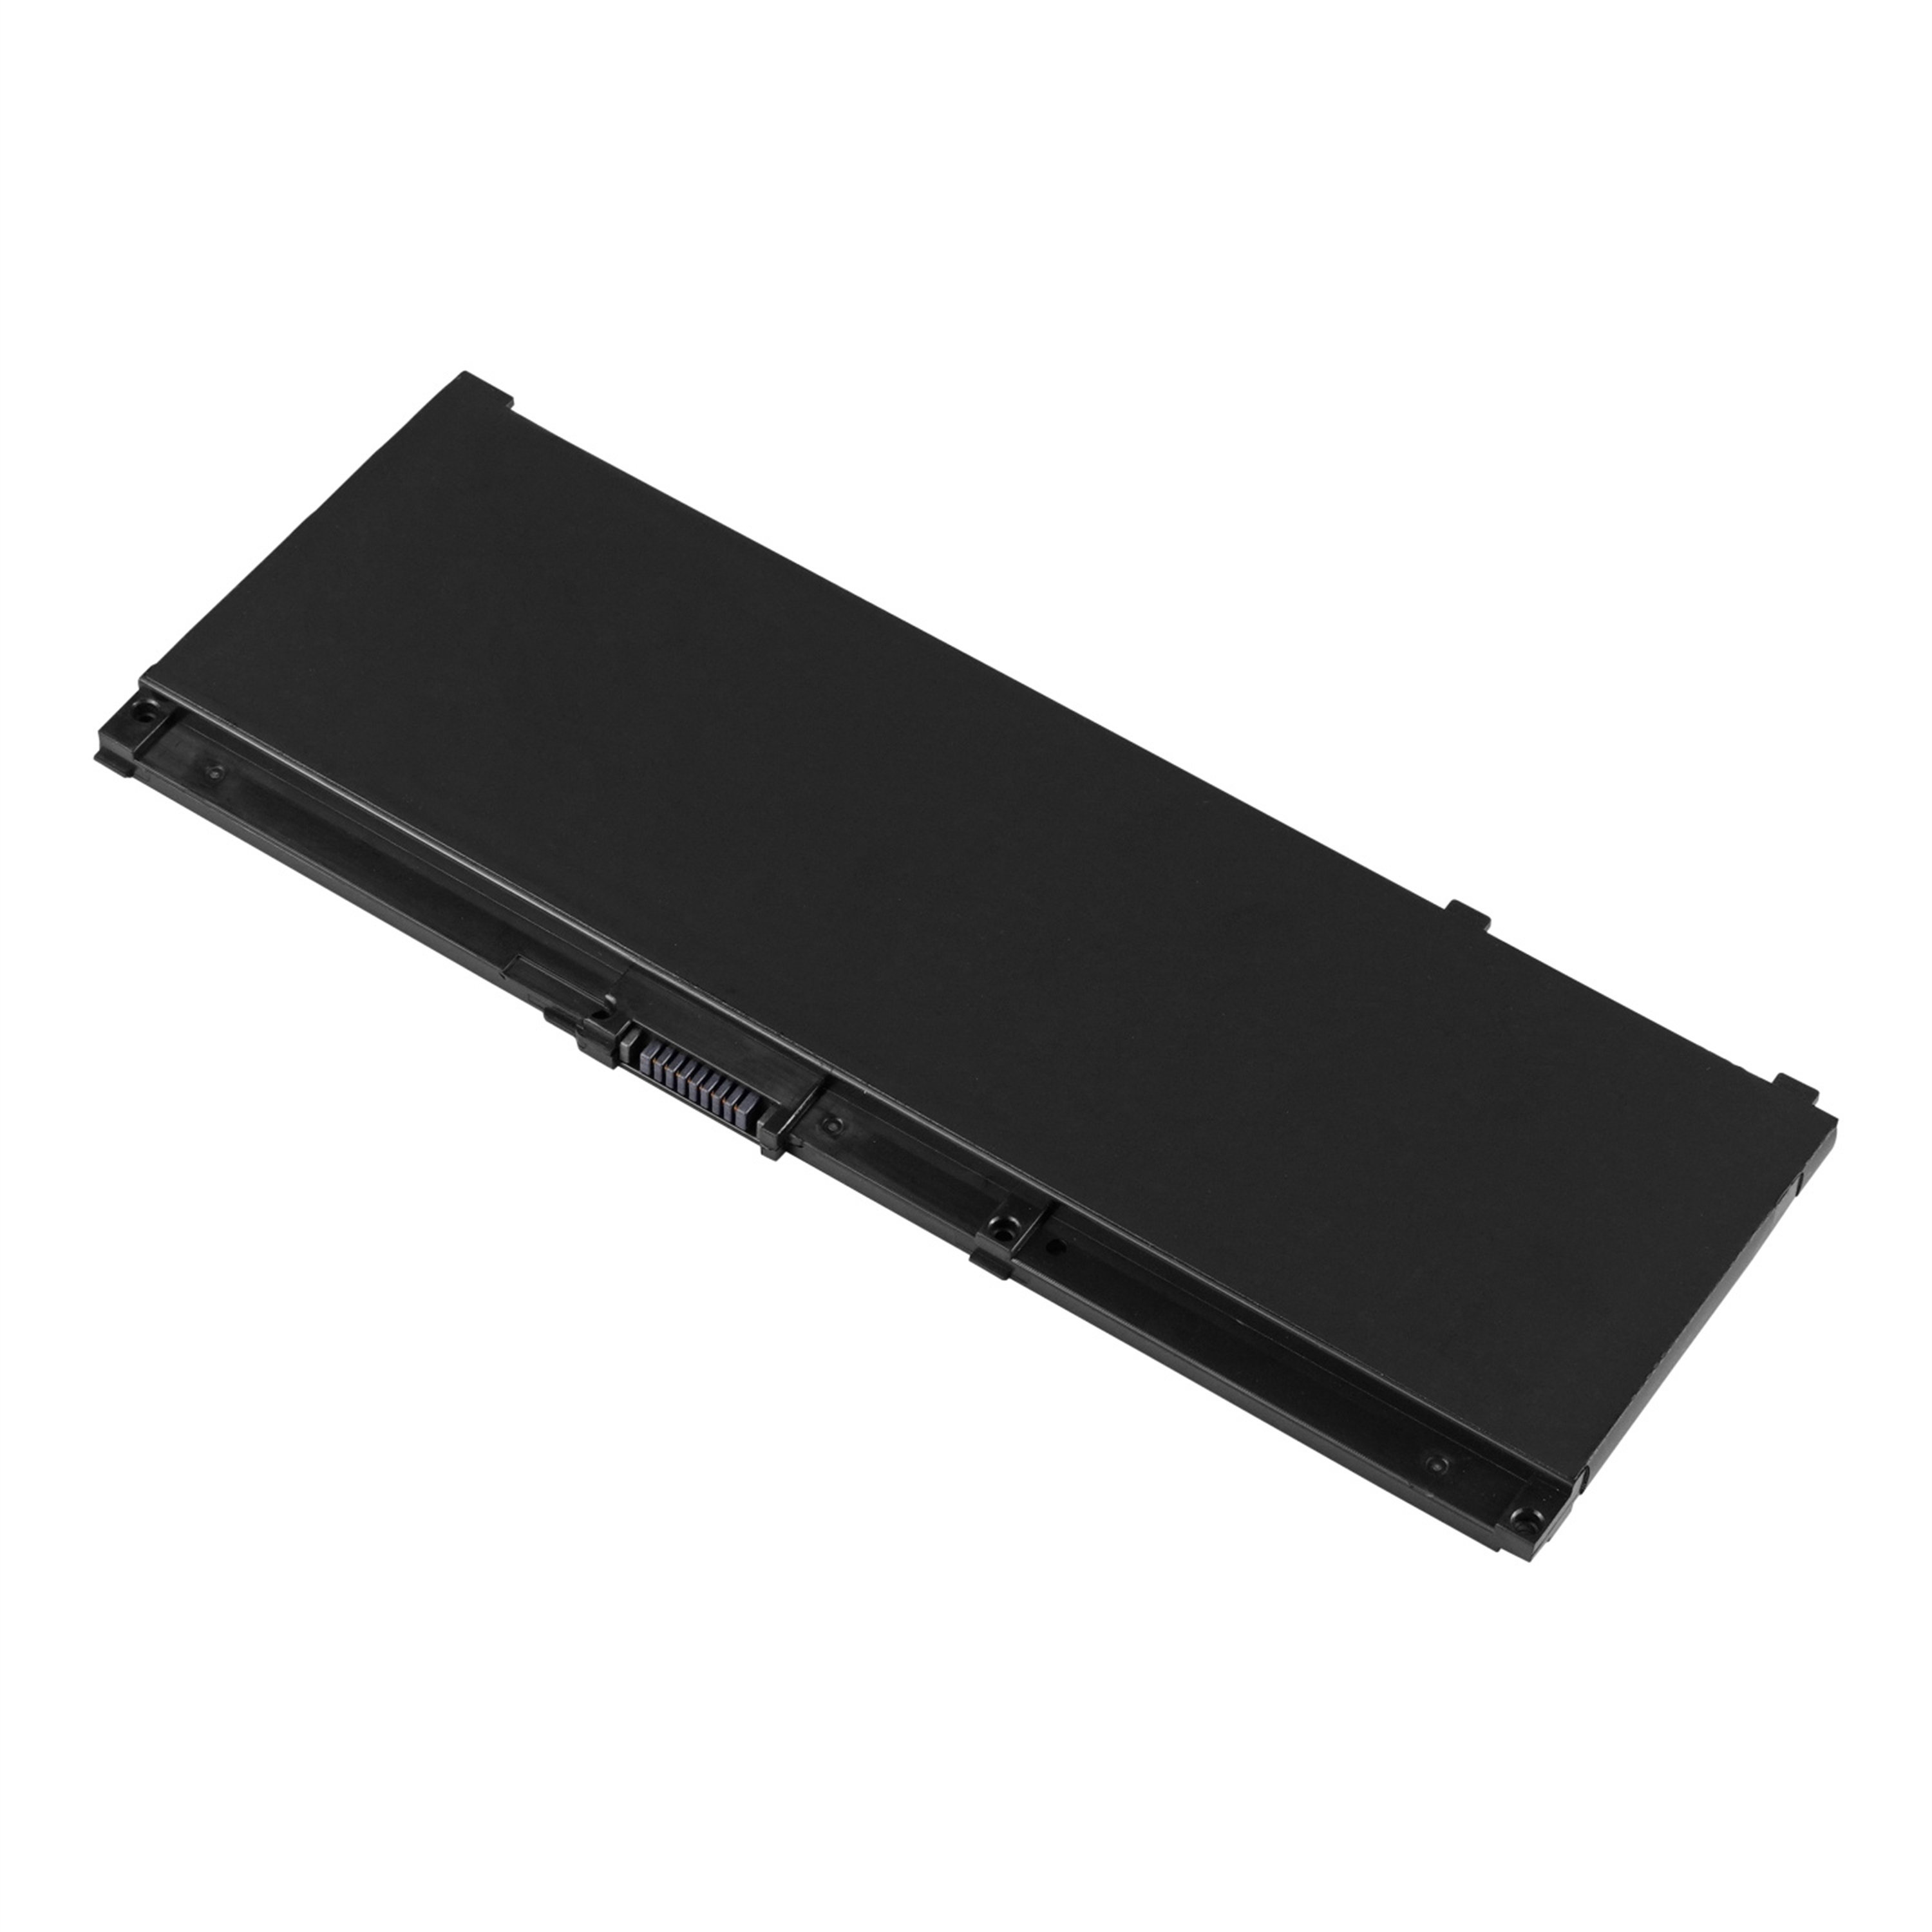 SR04XL rechargeable lithium ion Notebook battery Laptop battery For HP 15-CE000 Series HSTNN-IB7Z 15.4V 70.07Wh 4550mAh 4cell